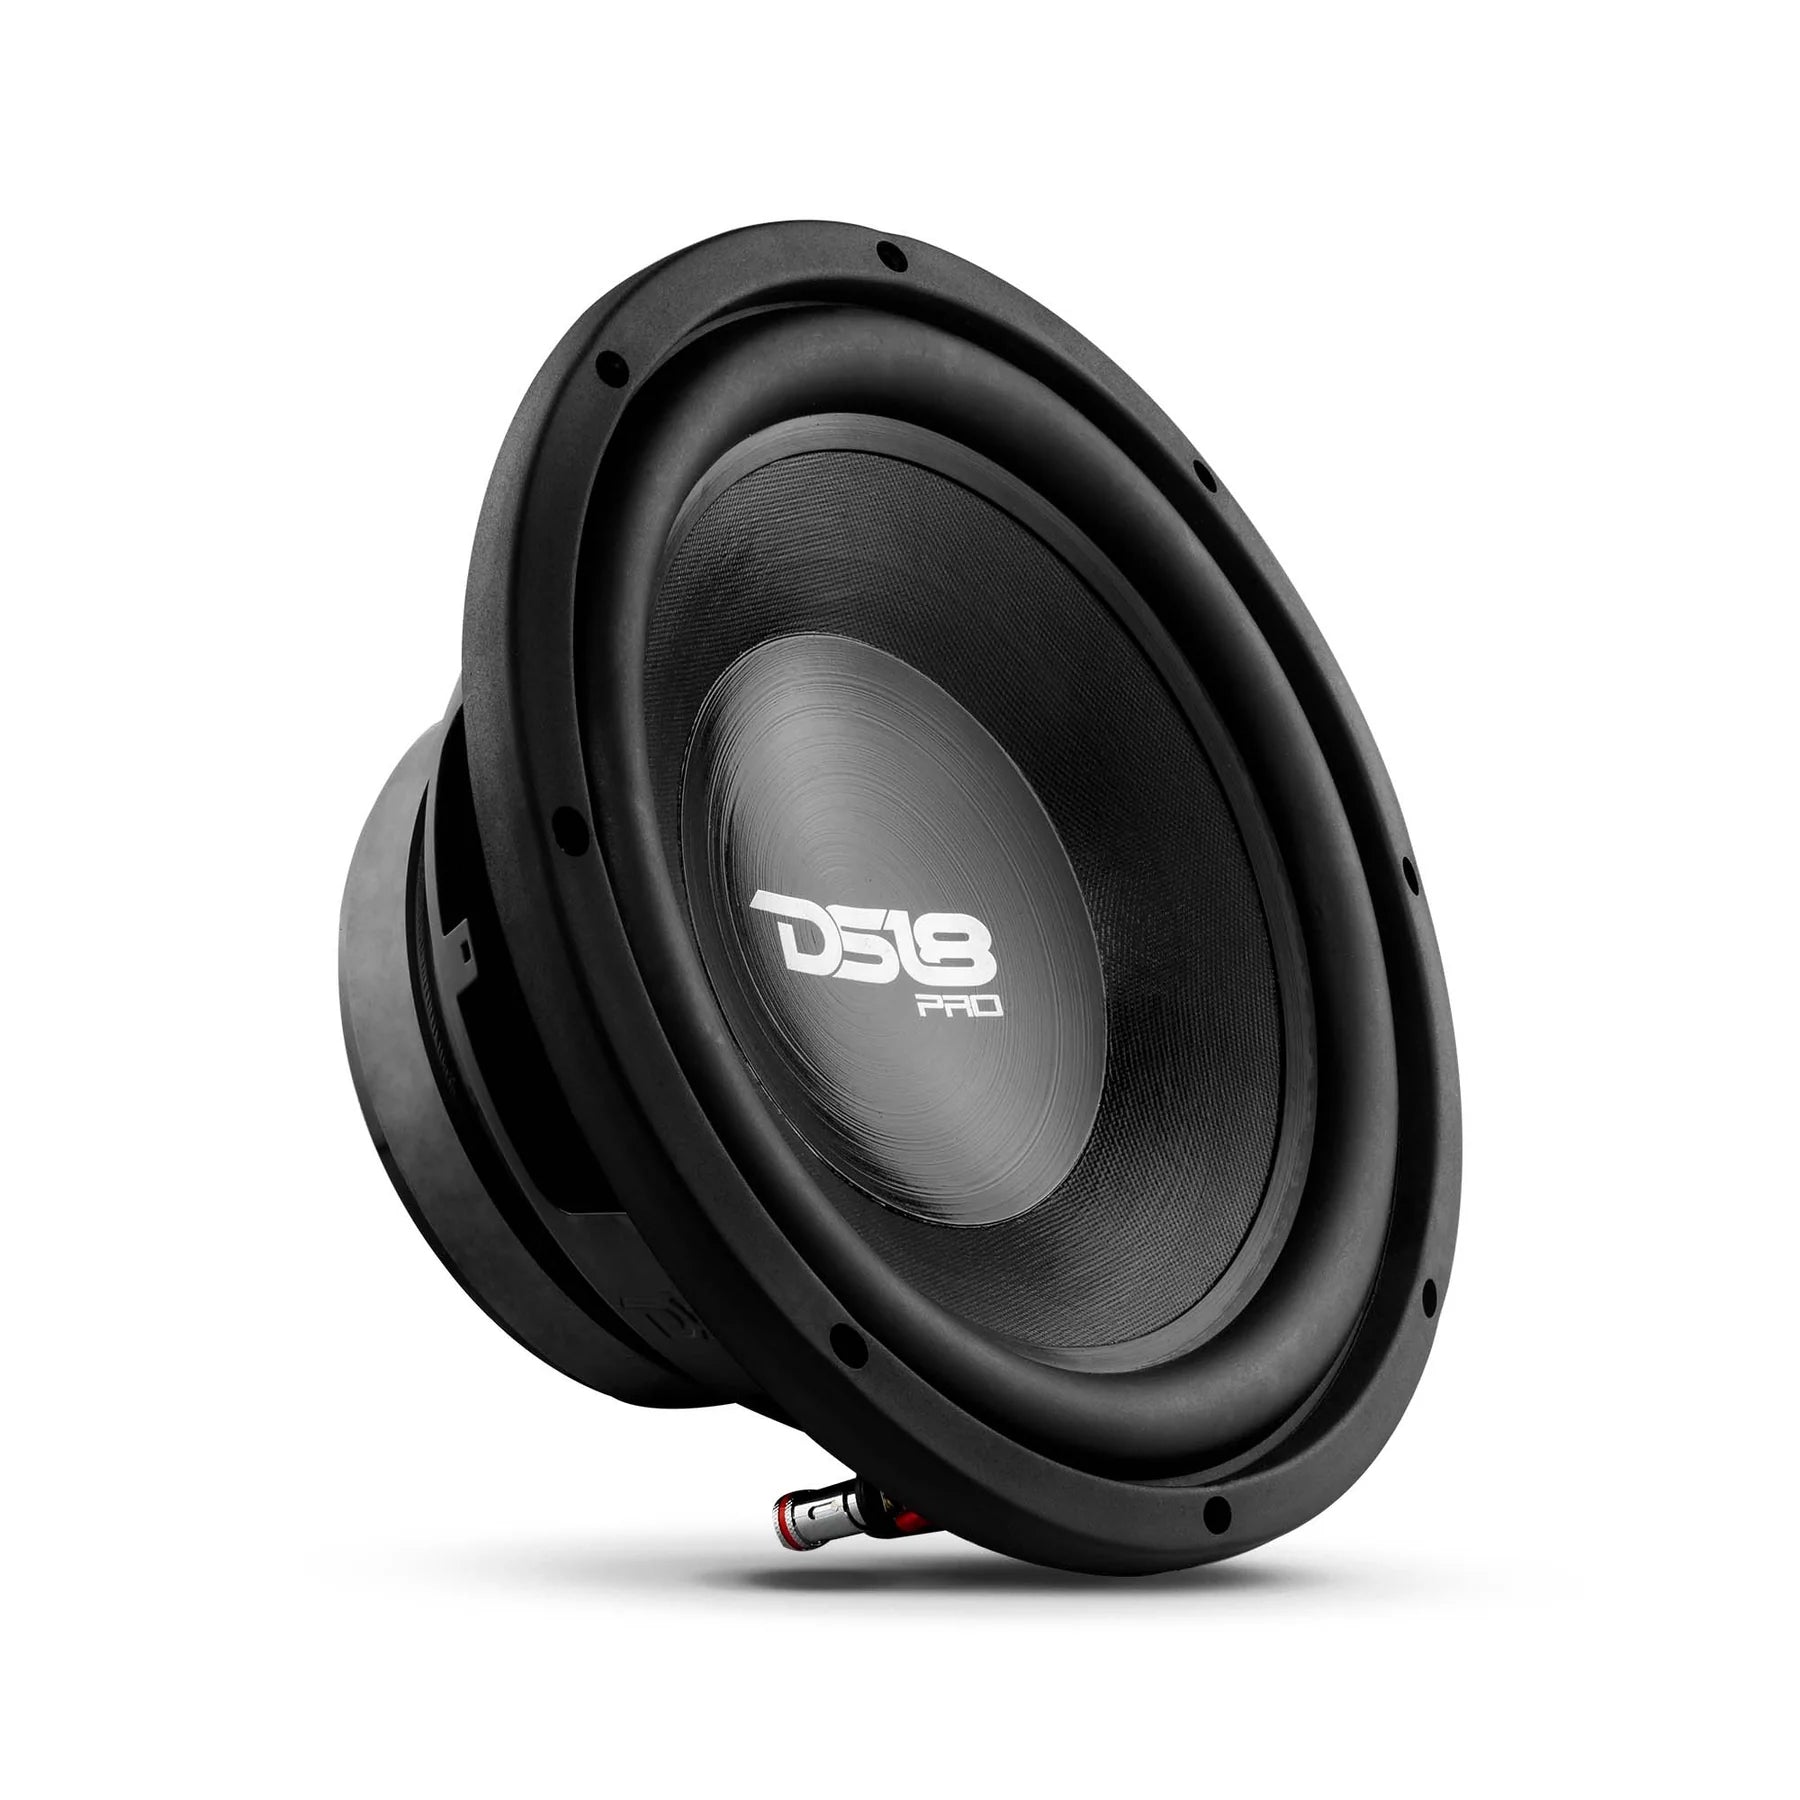 DS18 PRO-W10.2S 10" Water Resistant Motorcycle & Powersports Woofer 700 Watts 2-Ohm Svc